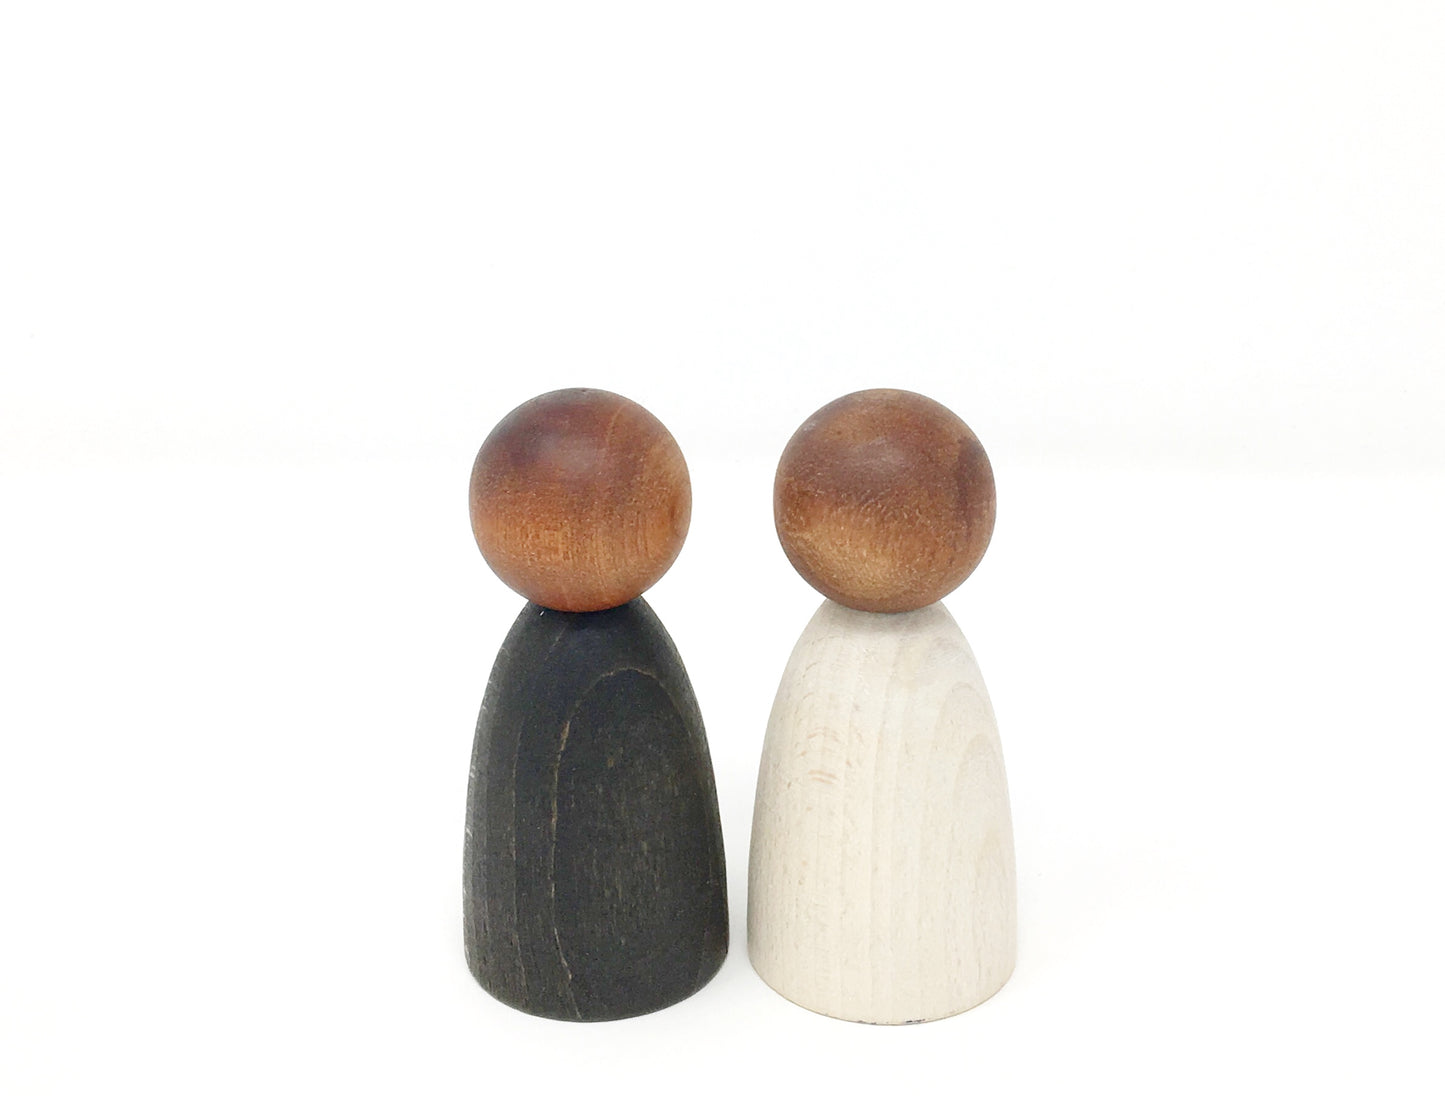 Two wooden peg people, one painted in black and the other in white.